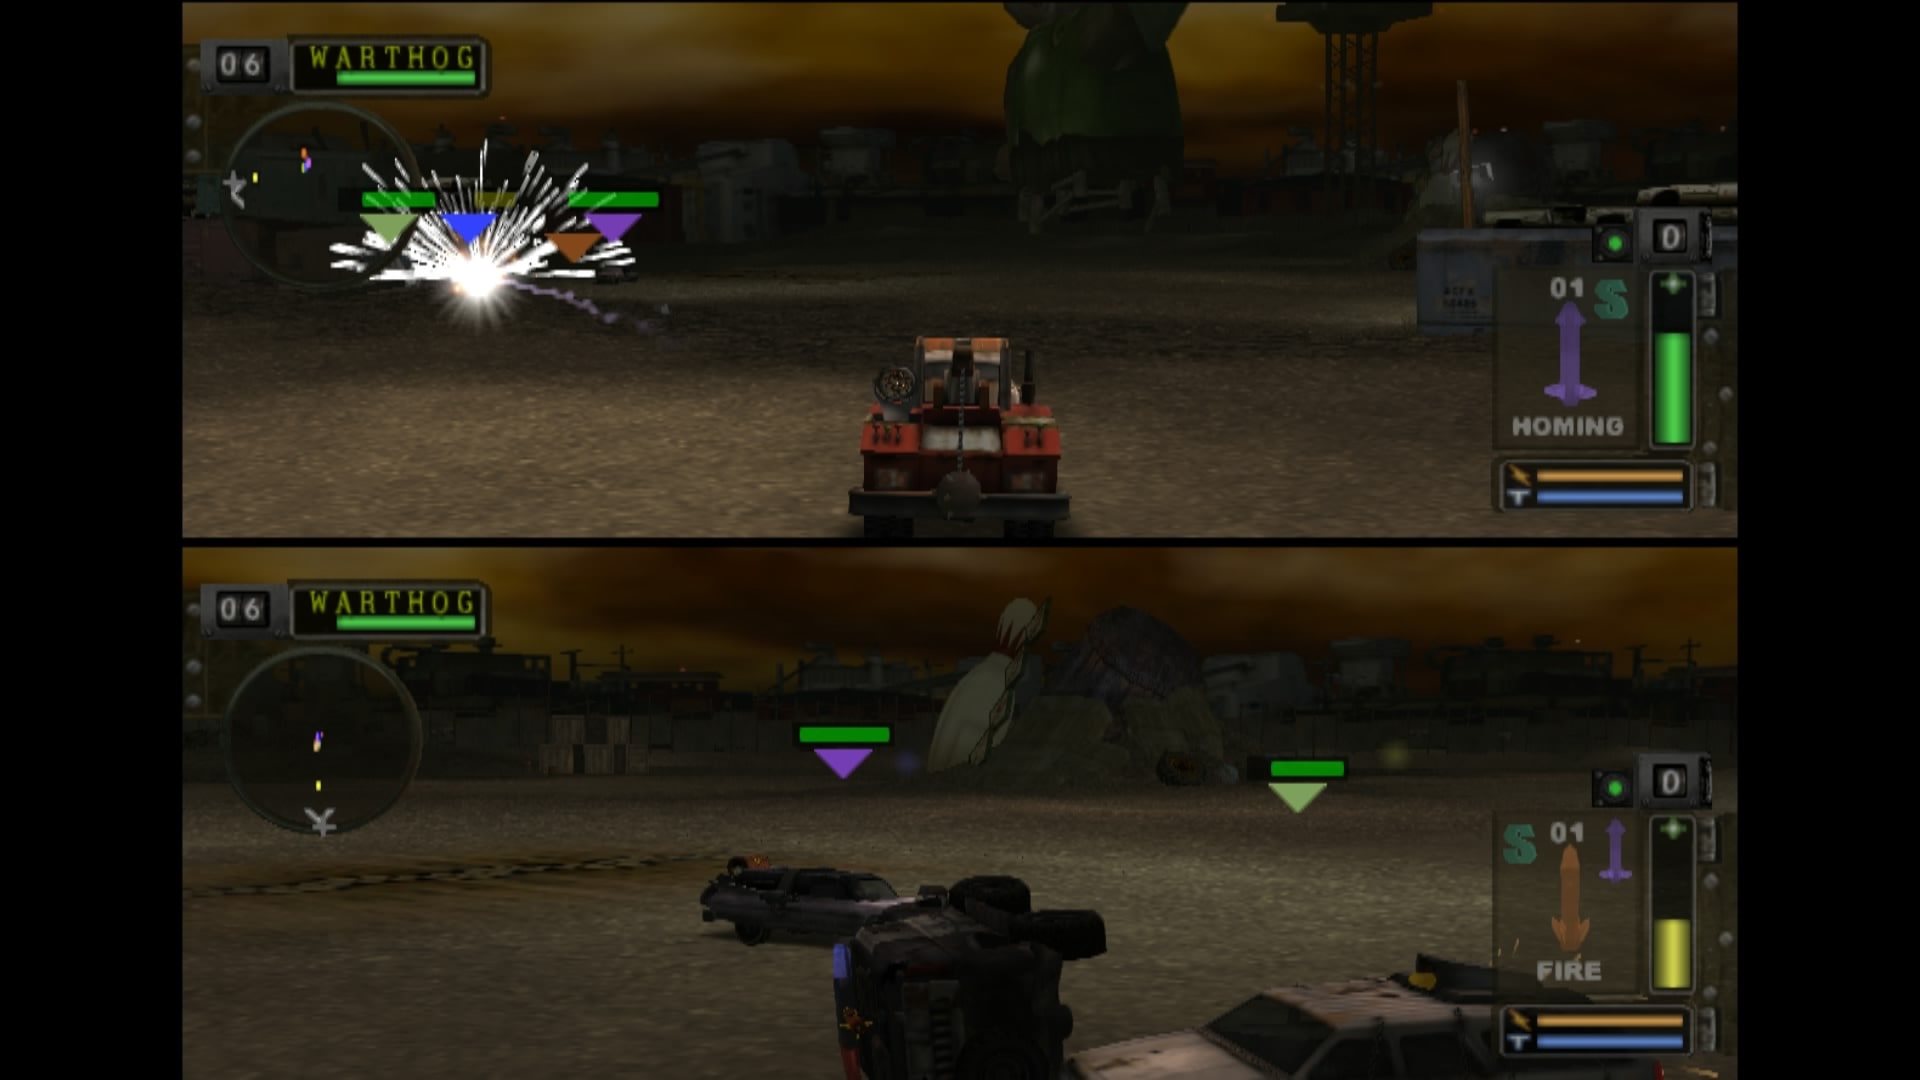 download twisted metal pa4